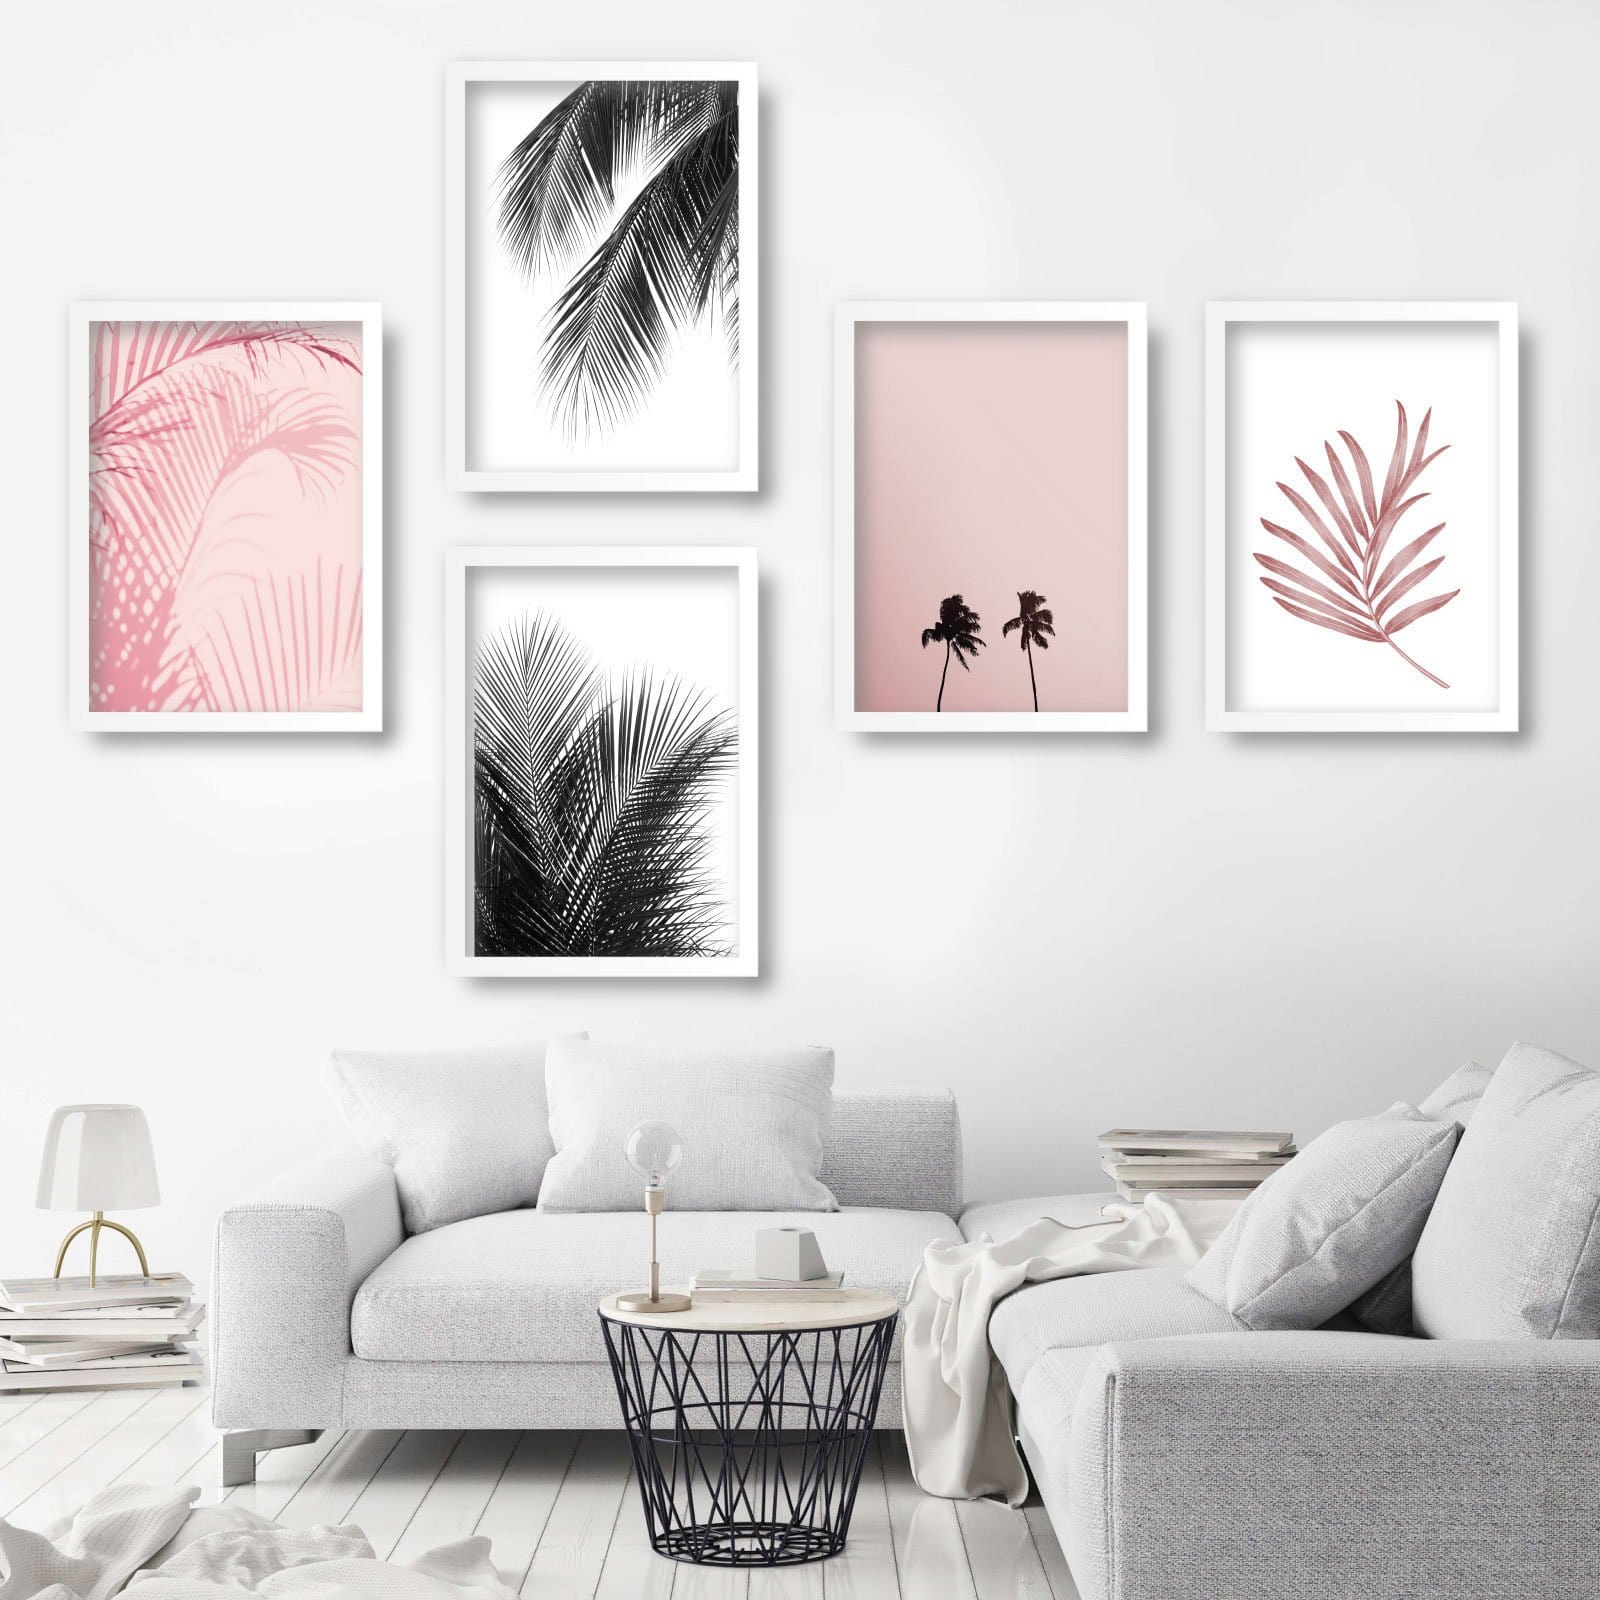 Set of 5 Gallery Wall Art Prints ORIGINAL Pink & Black ABSTRACT Botanical Palm Tree Wall Floral Pictures Posters Artwork